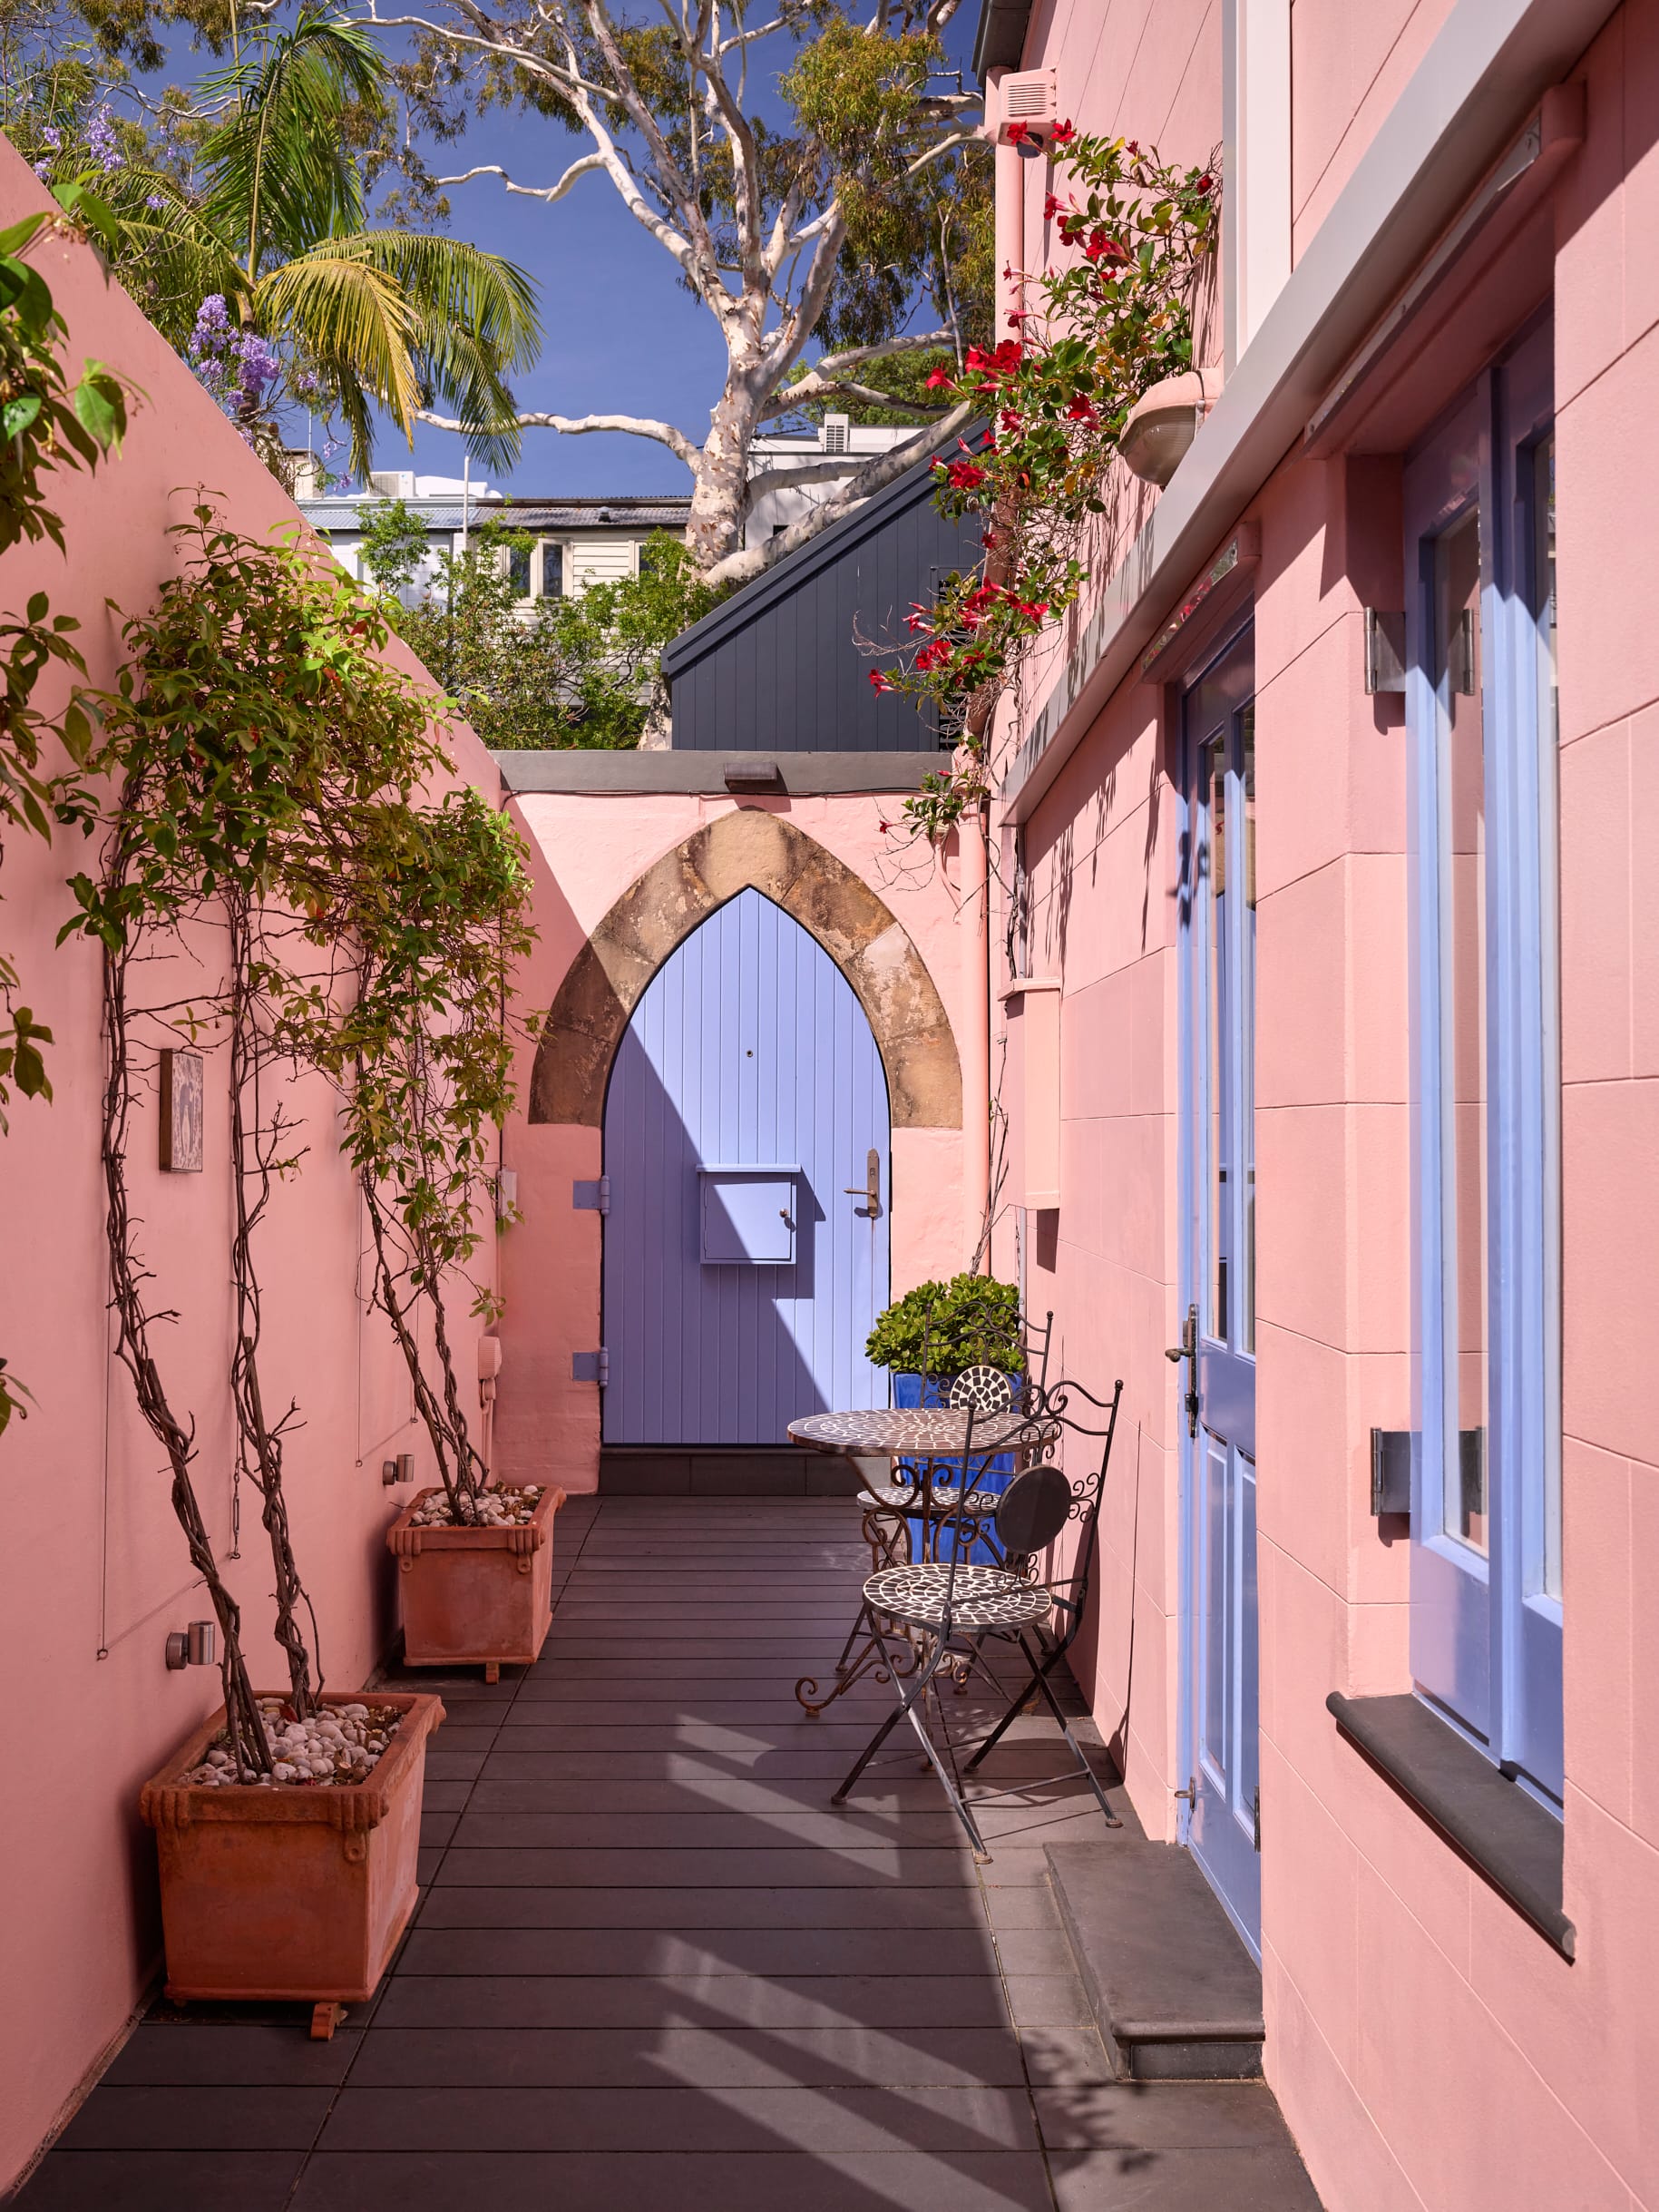 Chapel House by FURNISHD. Photography by Alicia Taylor. Patio with pink walls and blue window frames. Blue arched door. Dark flooring and plants growing up walls. 